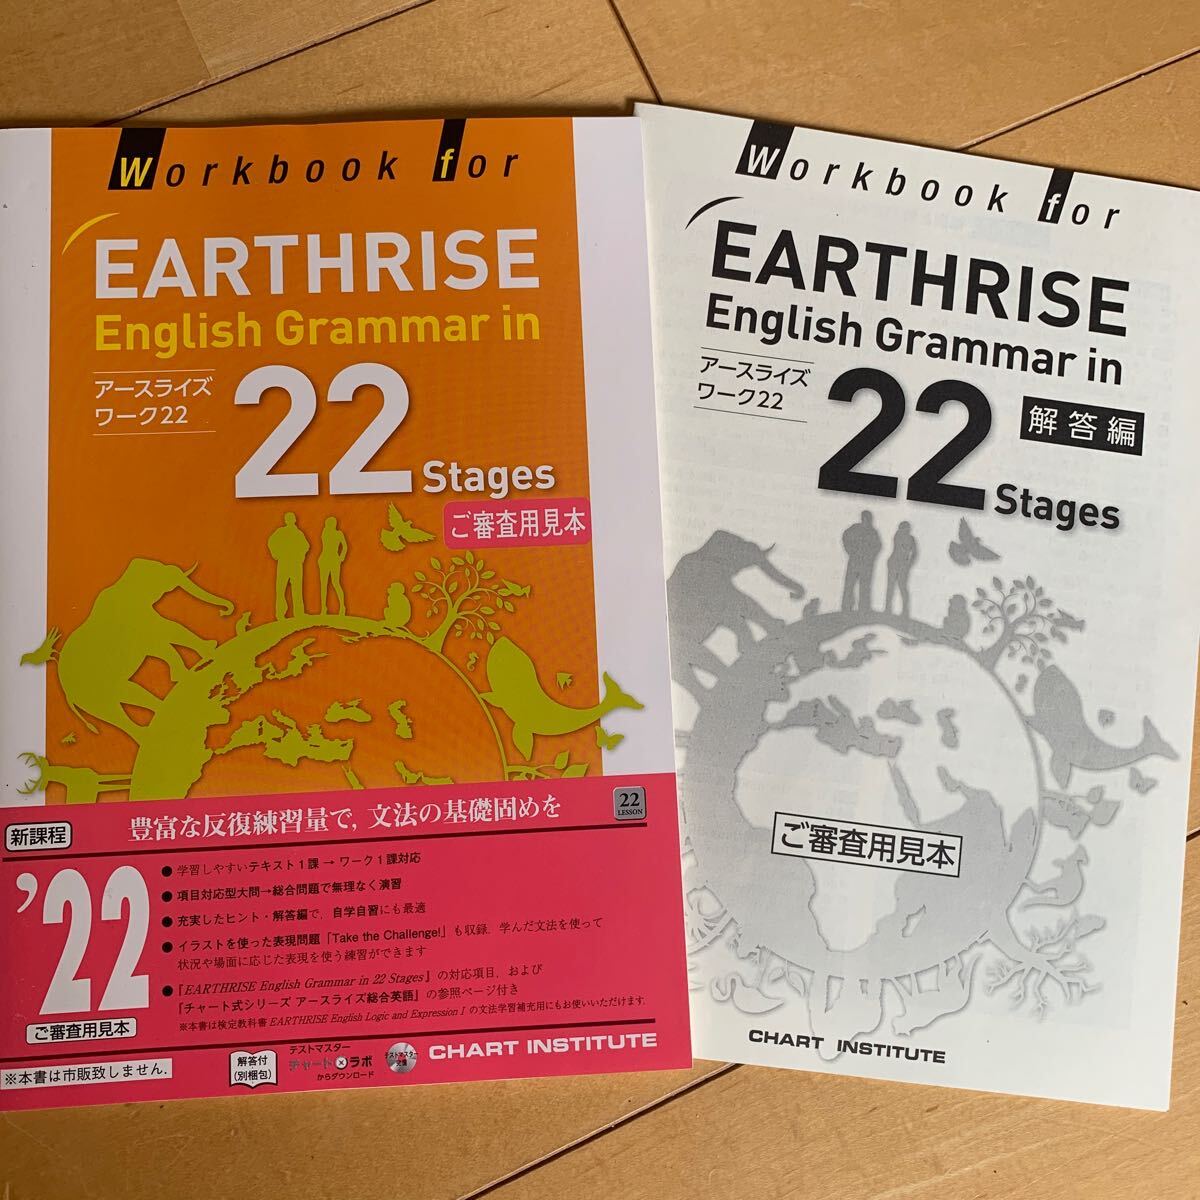 Workbook for EARTHRISE English Grammar in 22 Stages アースライズワークブック22_画像1